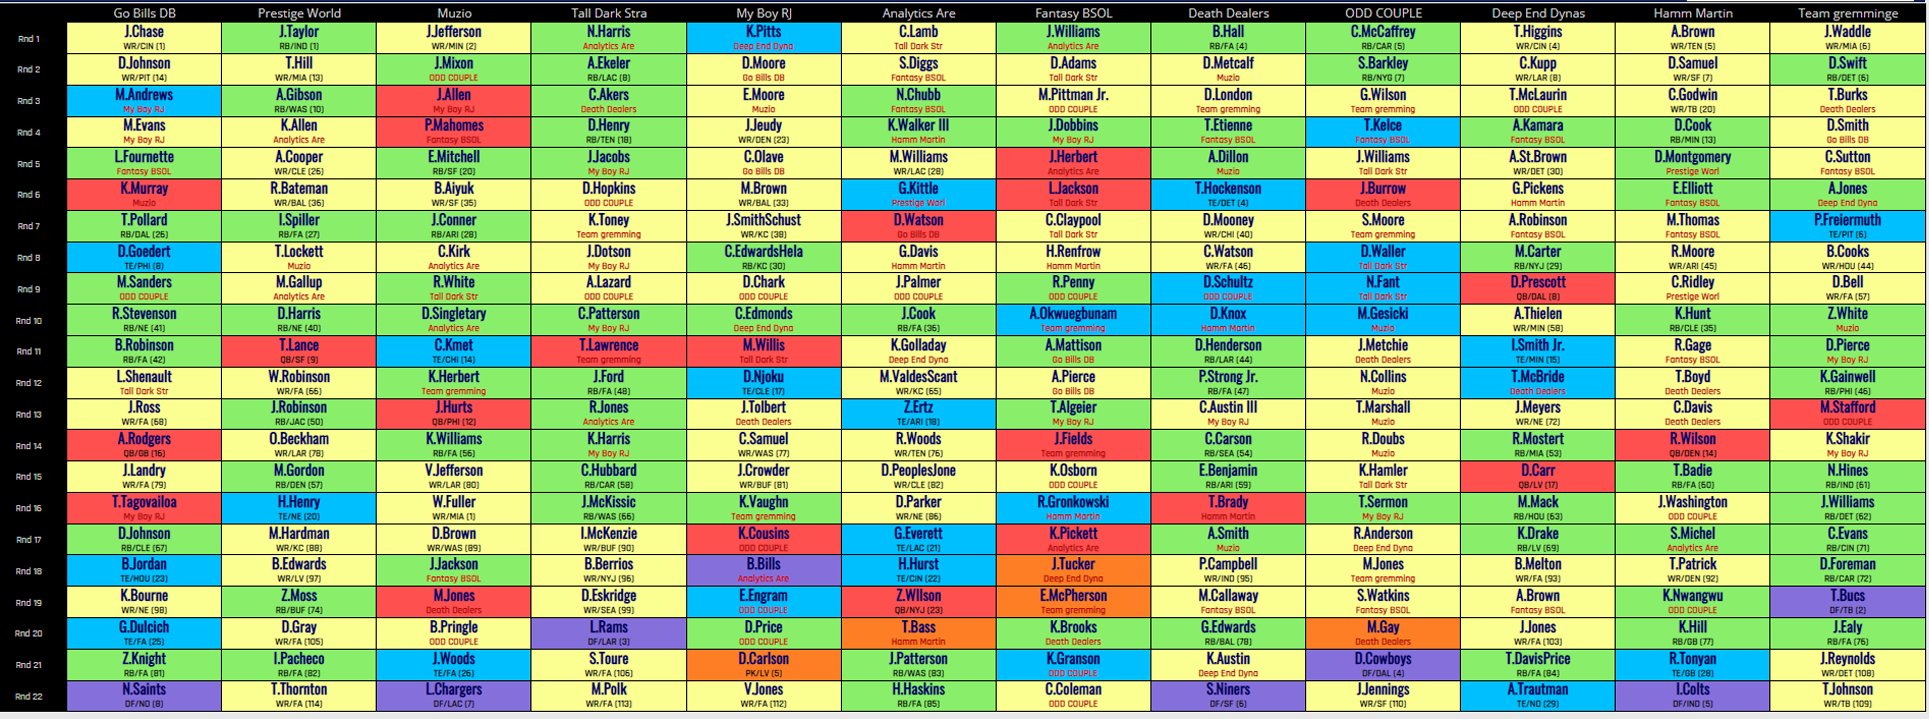 billy muzio on twitter we just wrapped up the 1k dynasty startup over at the playffwc below are the board amp rosters of each team plz note the trades in red below